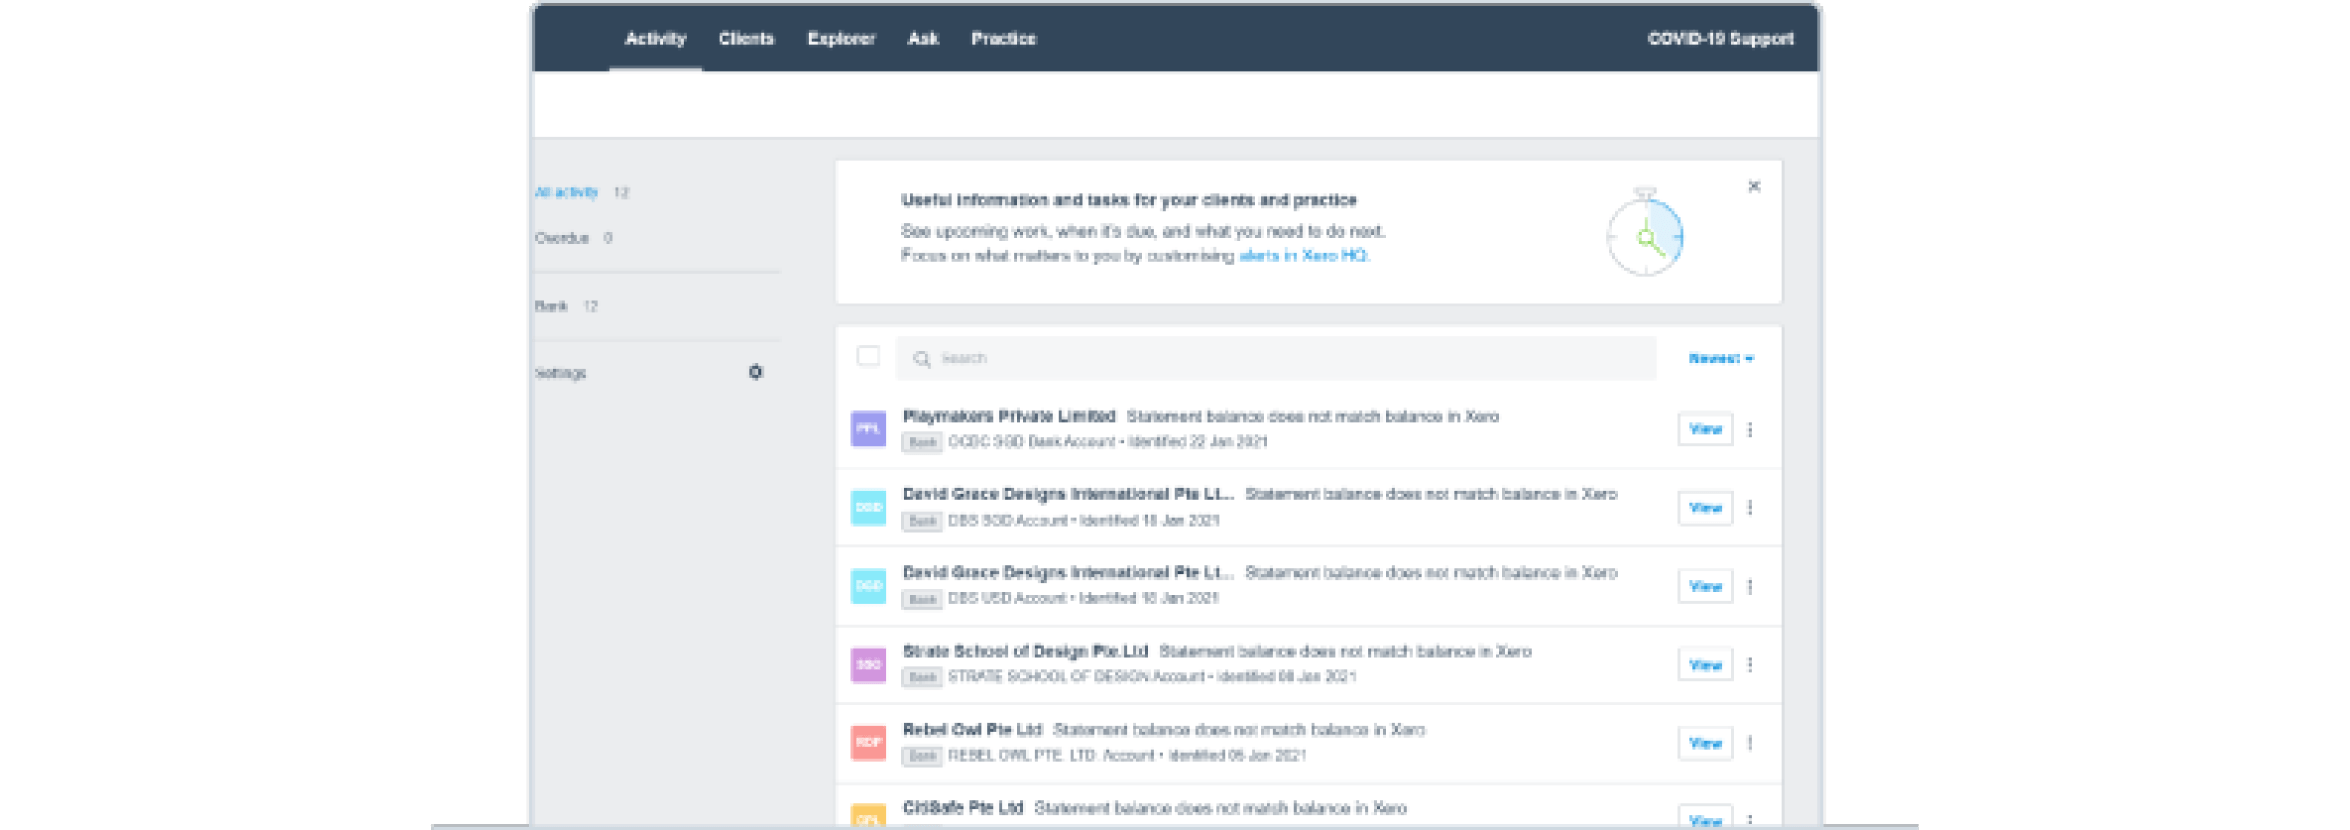 A view of the Xero client activities screen.